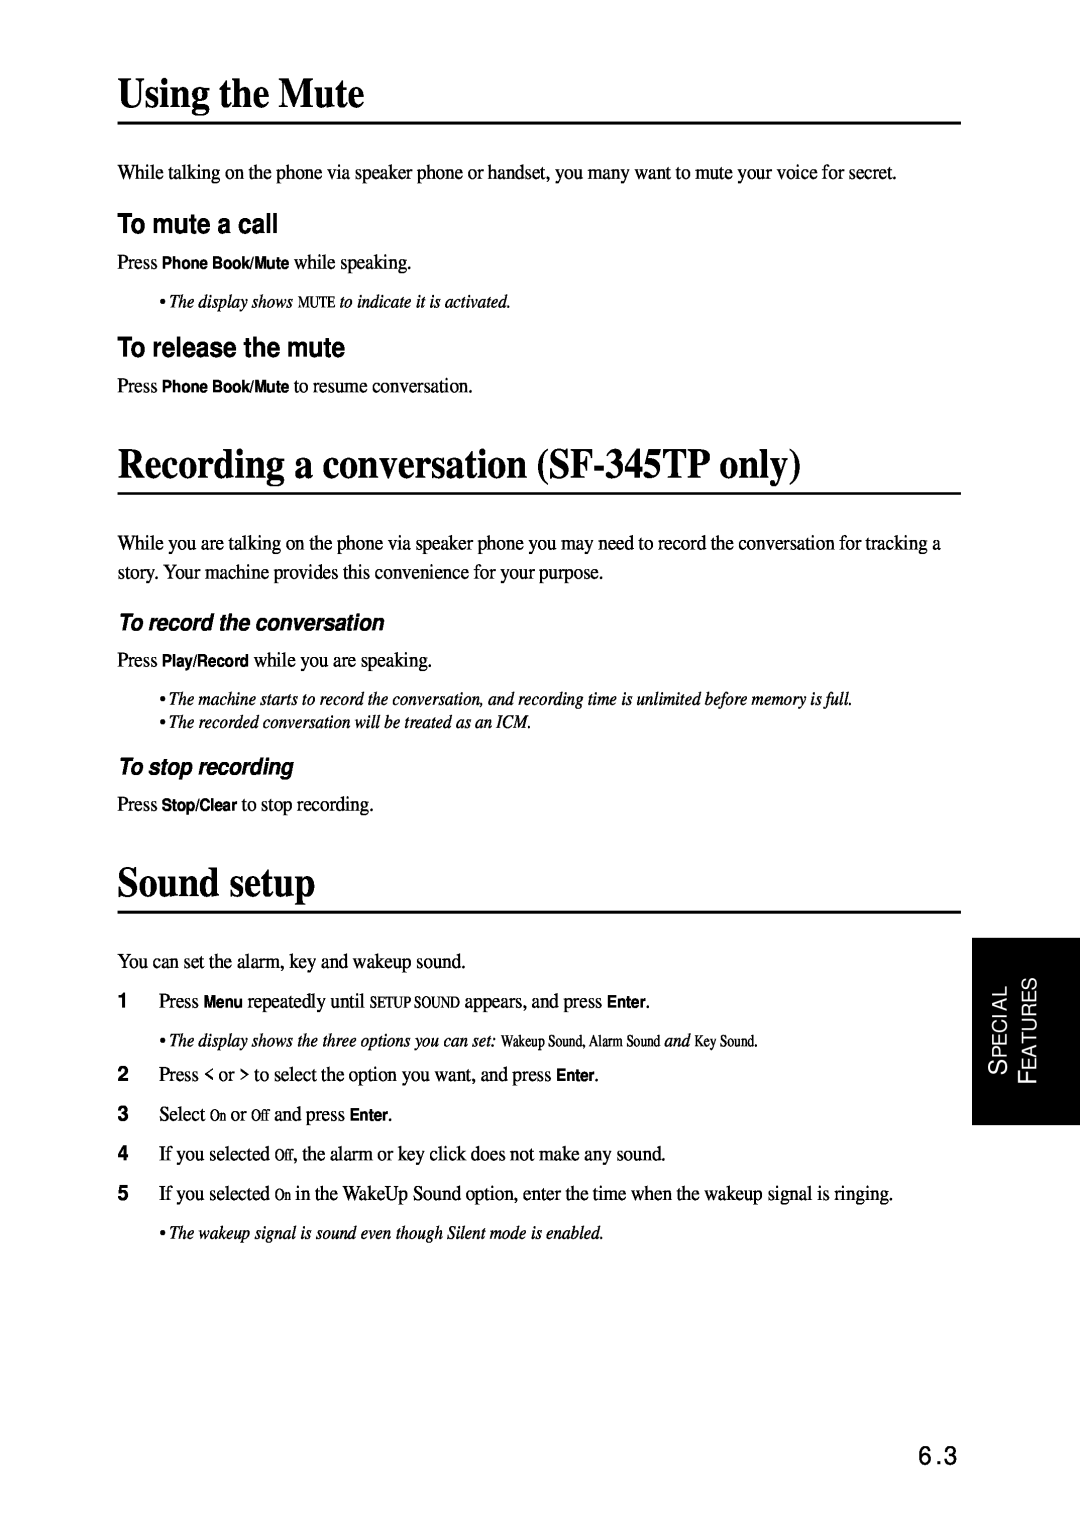 Samsung SF-340 Series manual Using the Mute, Recording a conversation SF-345TP only, Sound setup, To mute a call 